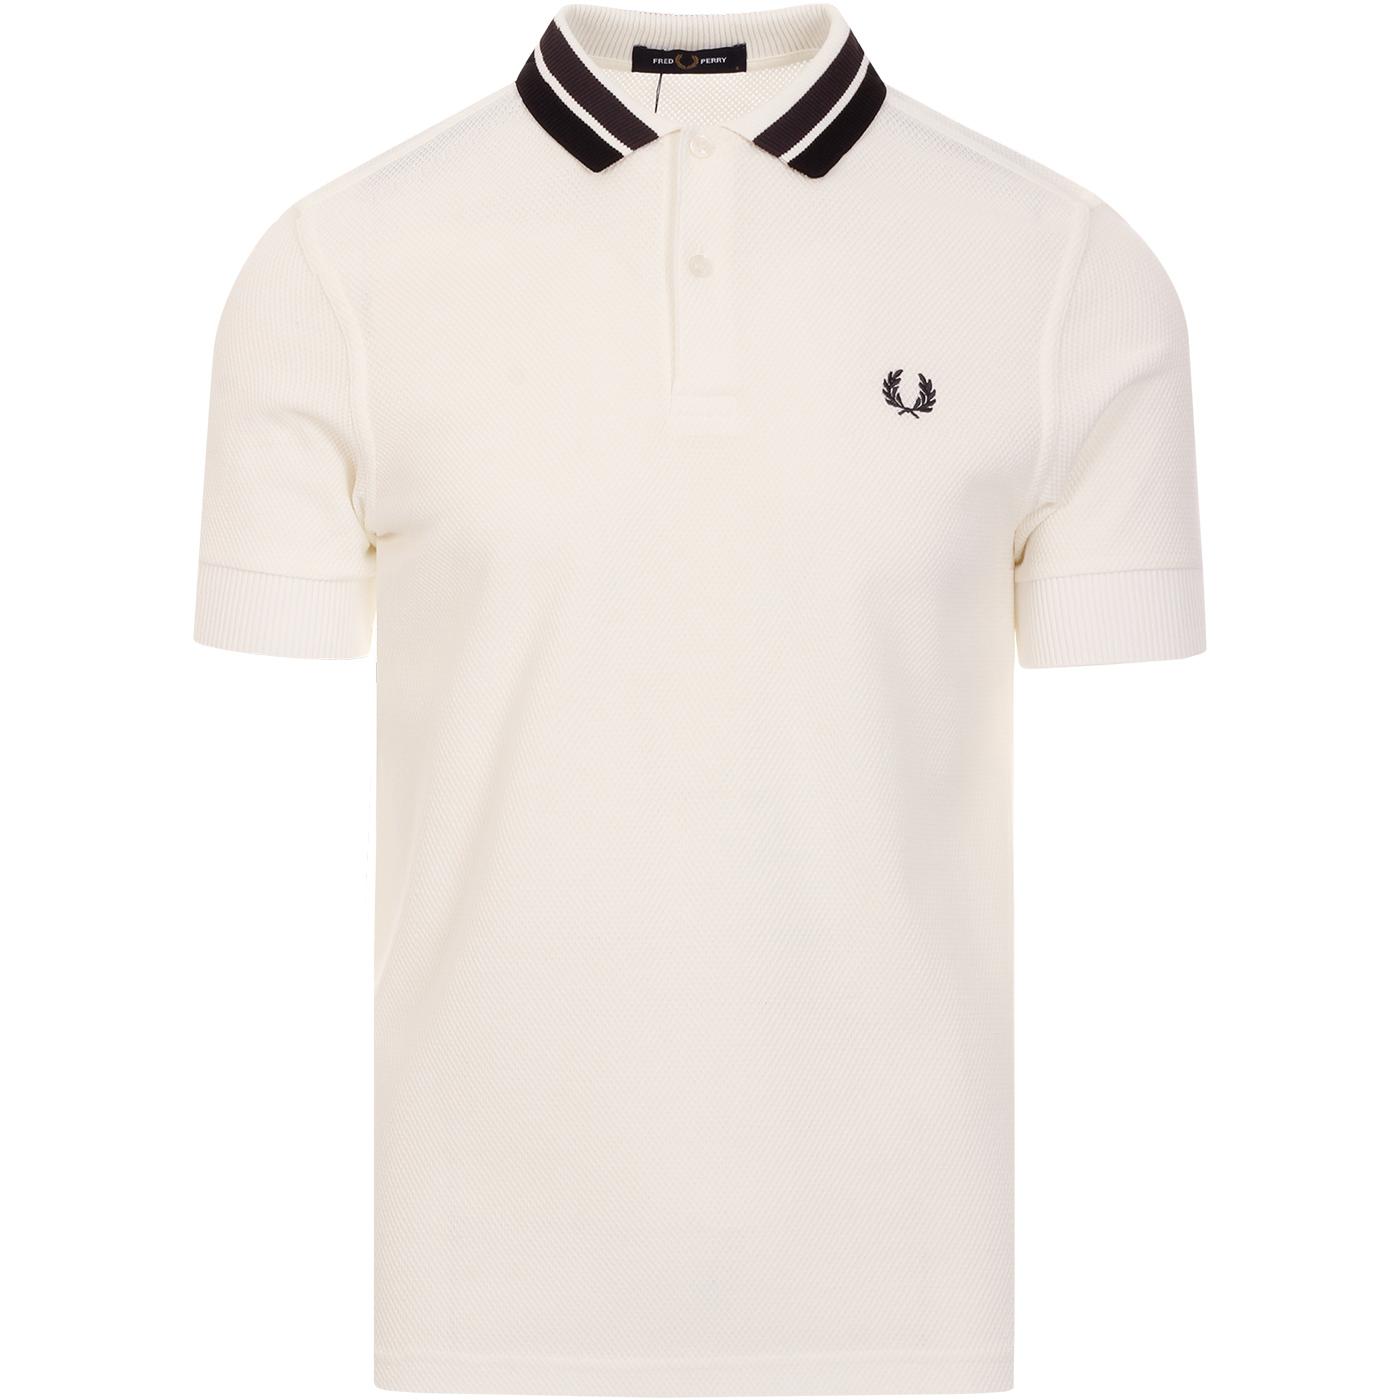 FRED PERRY Mod Bold Tipped Textured Polo Top WHITE